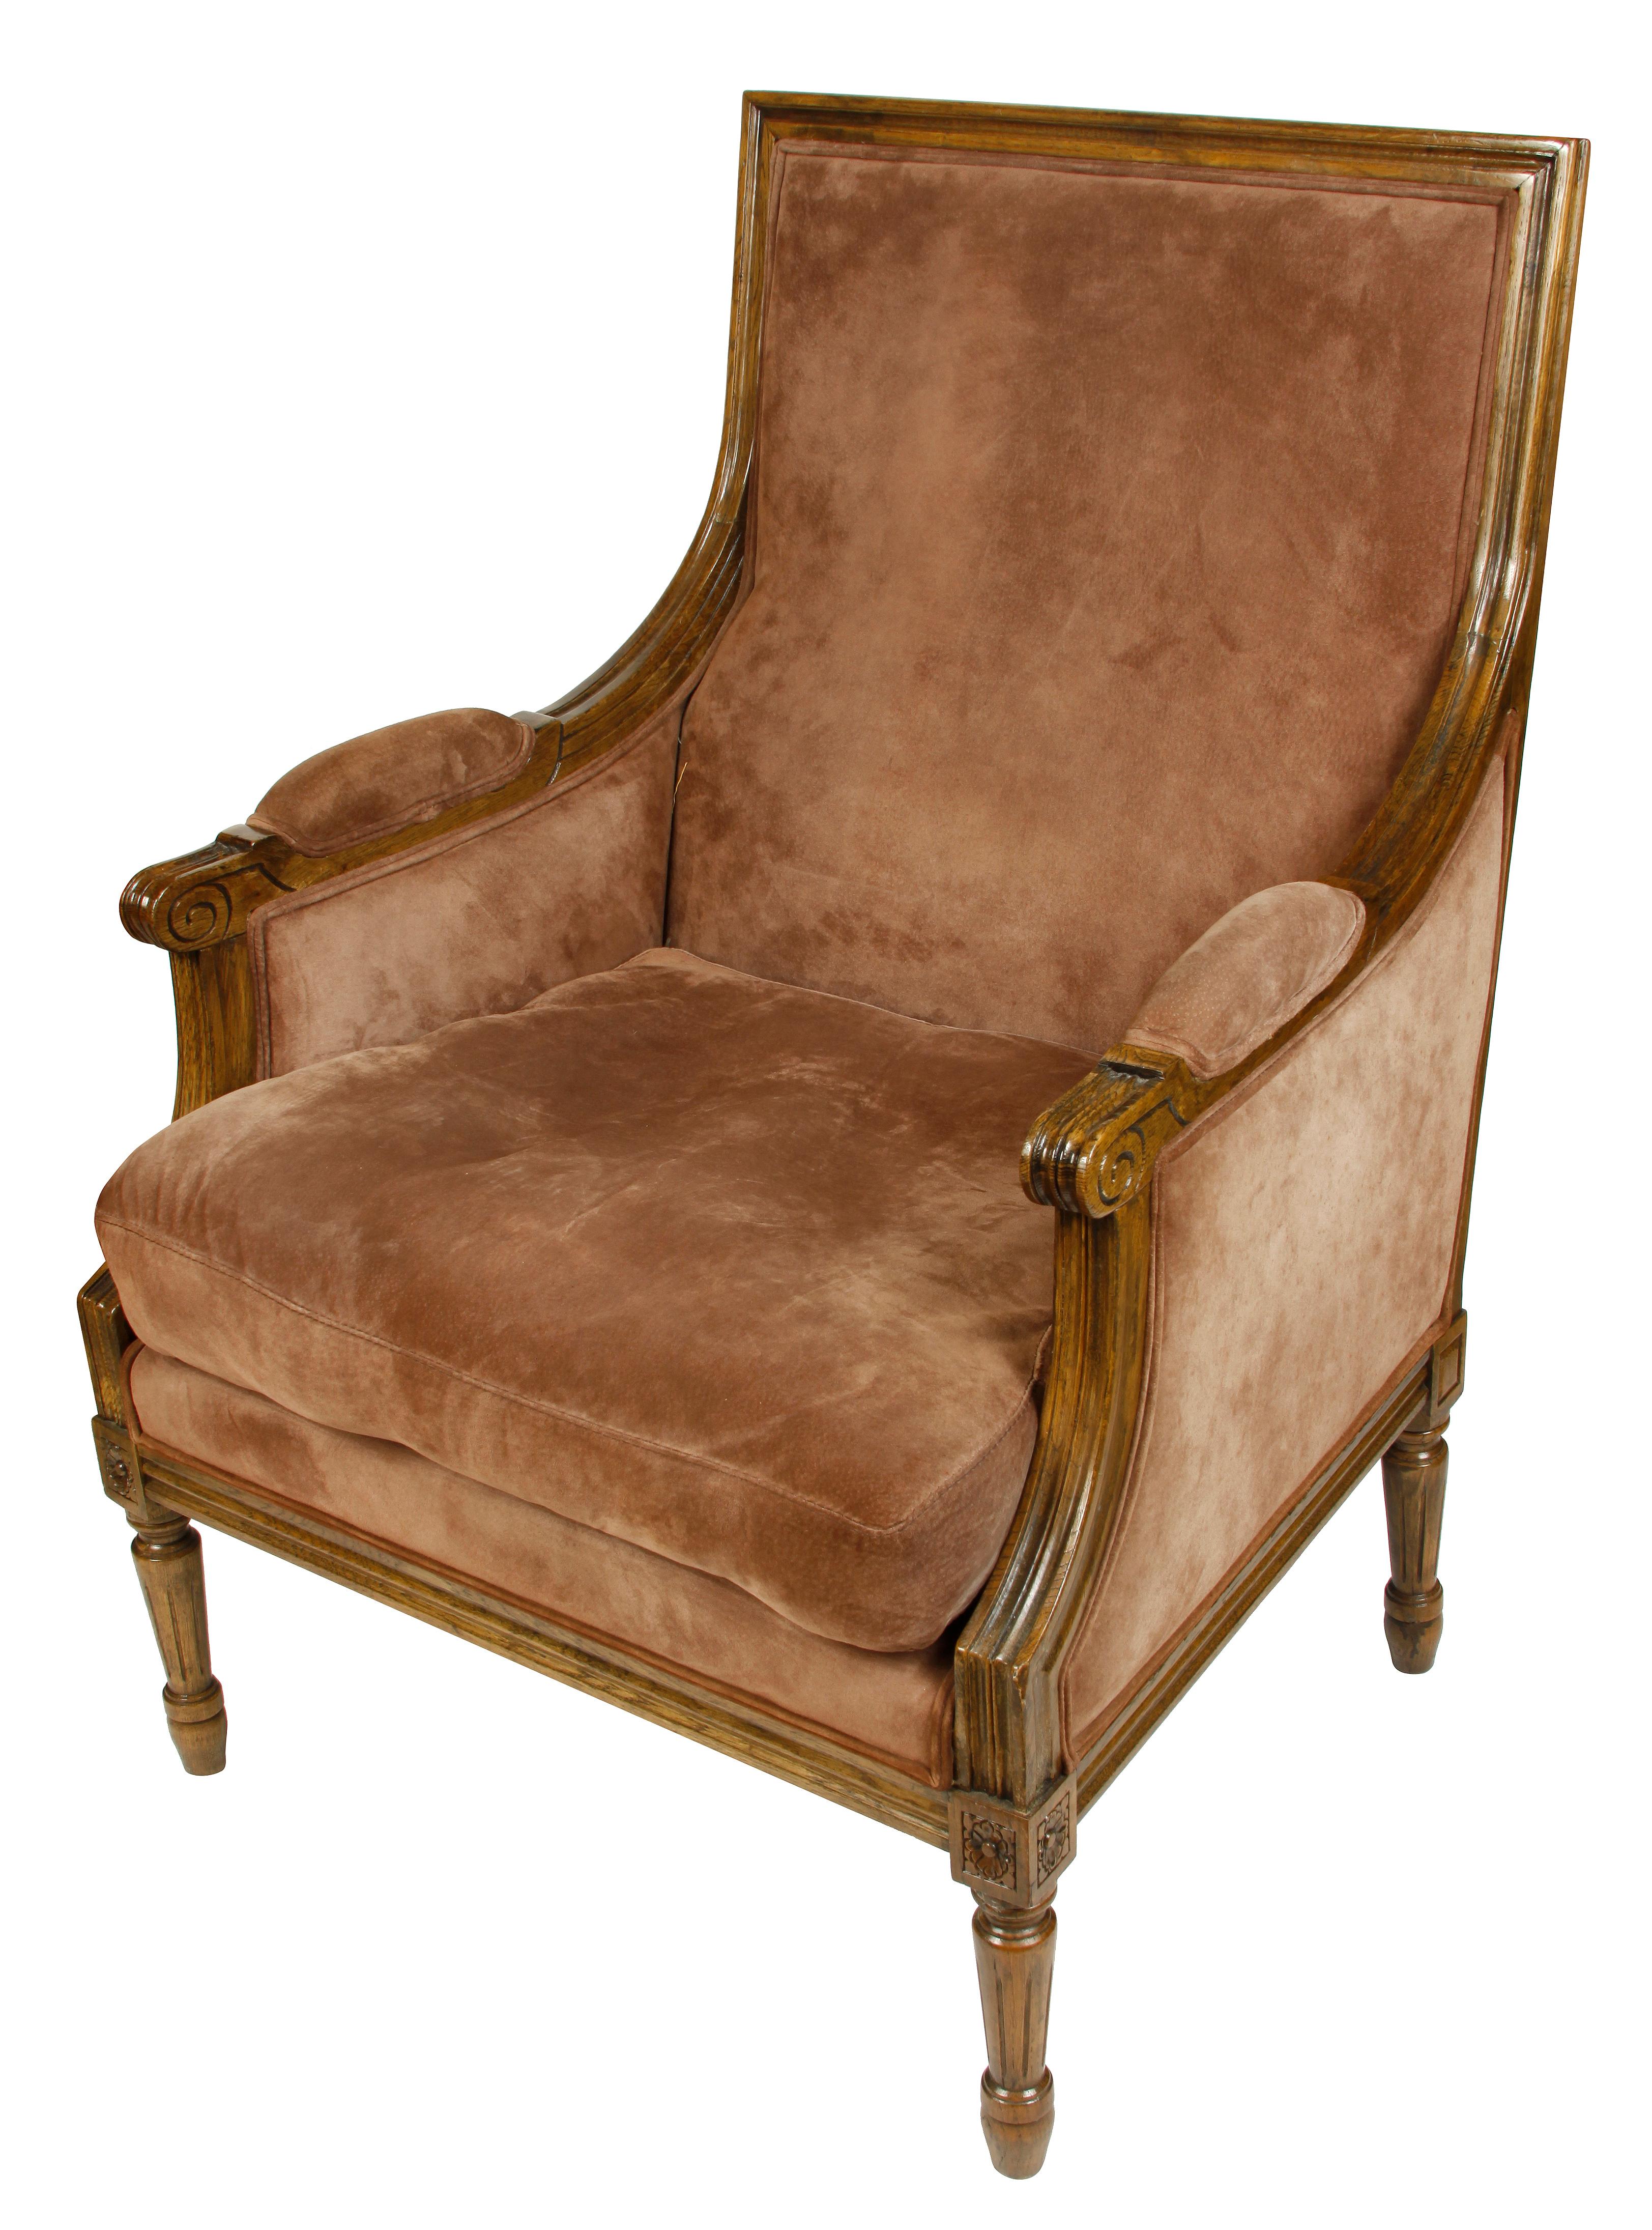 Louis XVI style suede upholstered bergère.